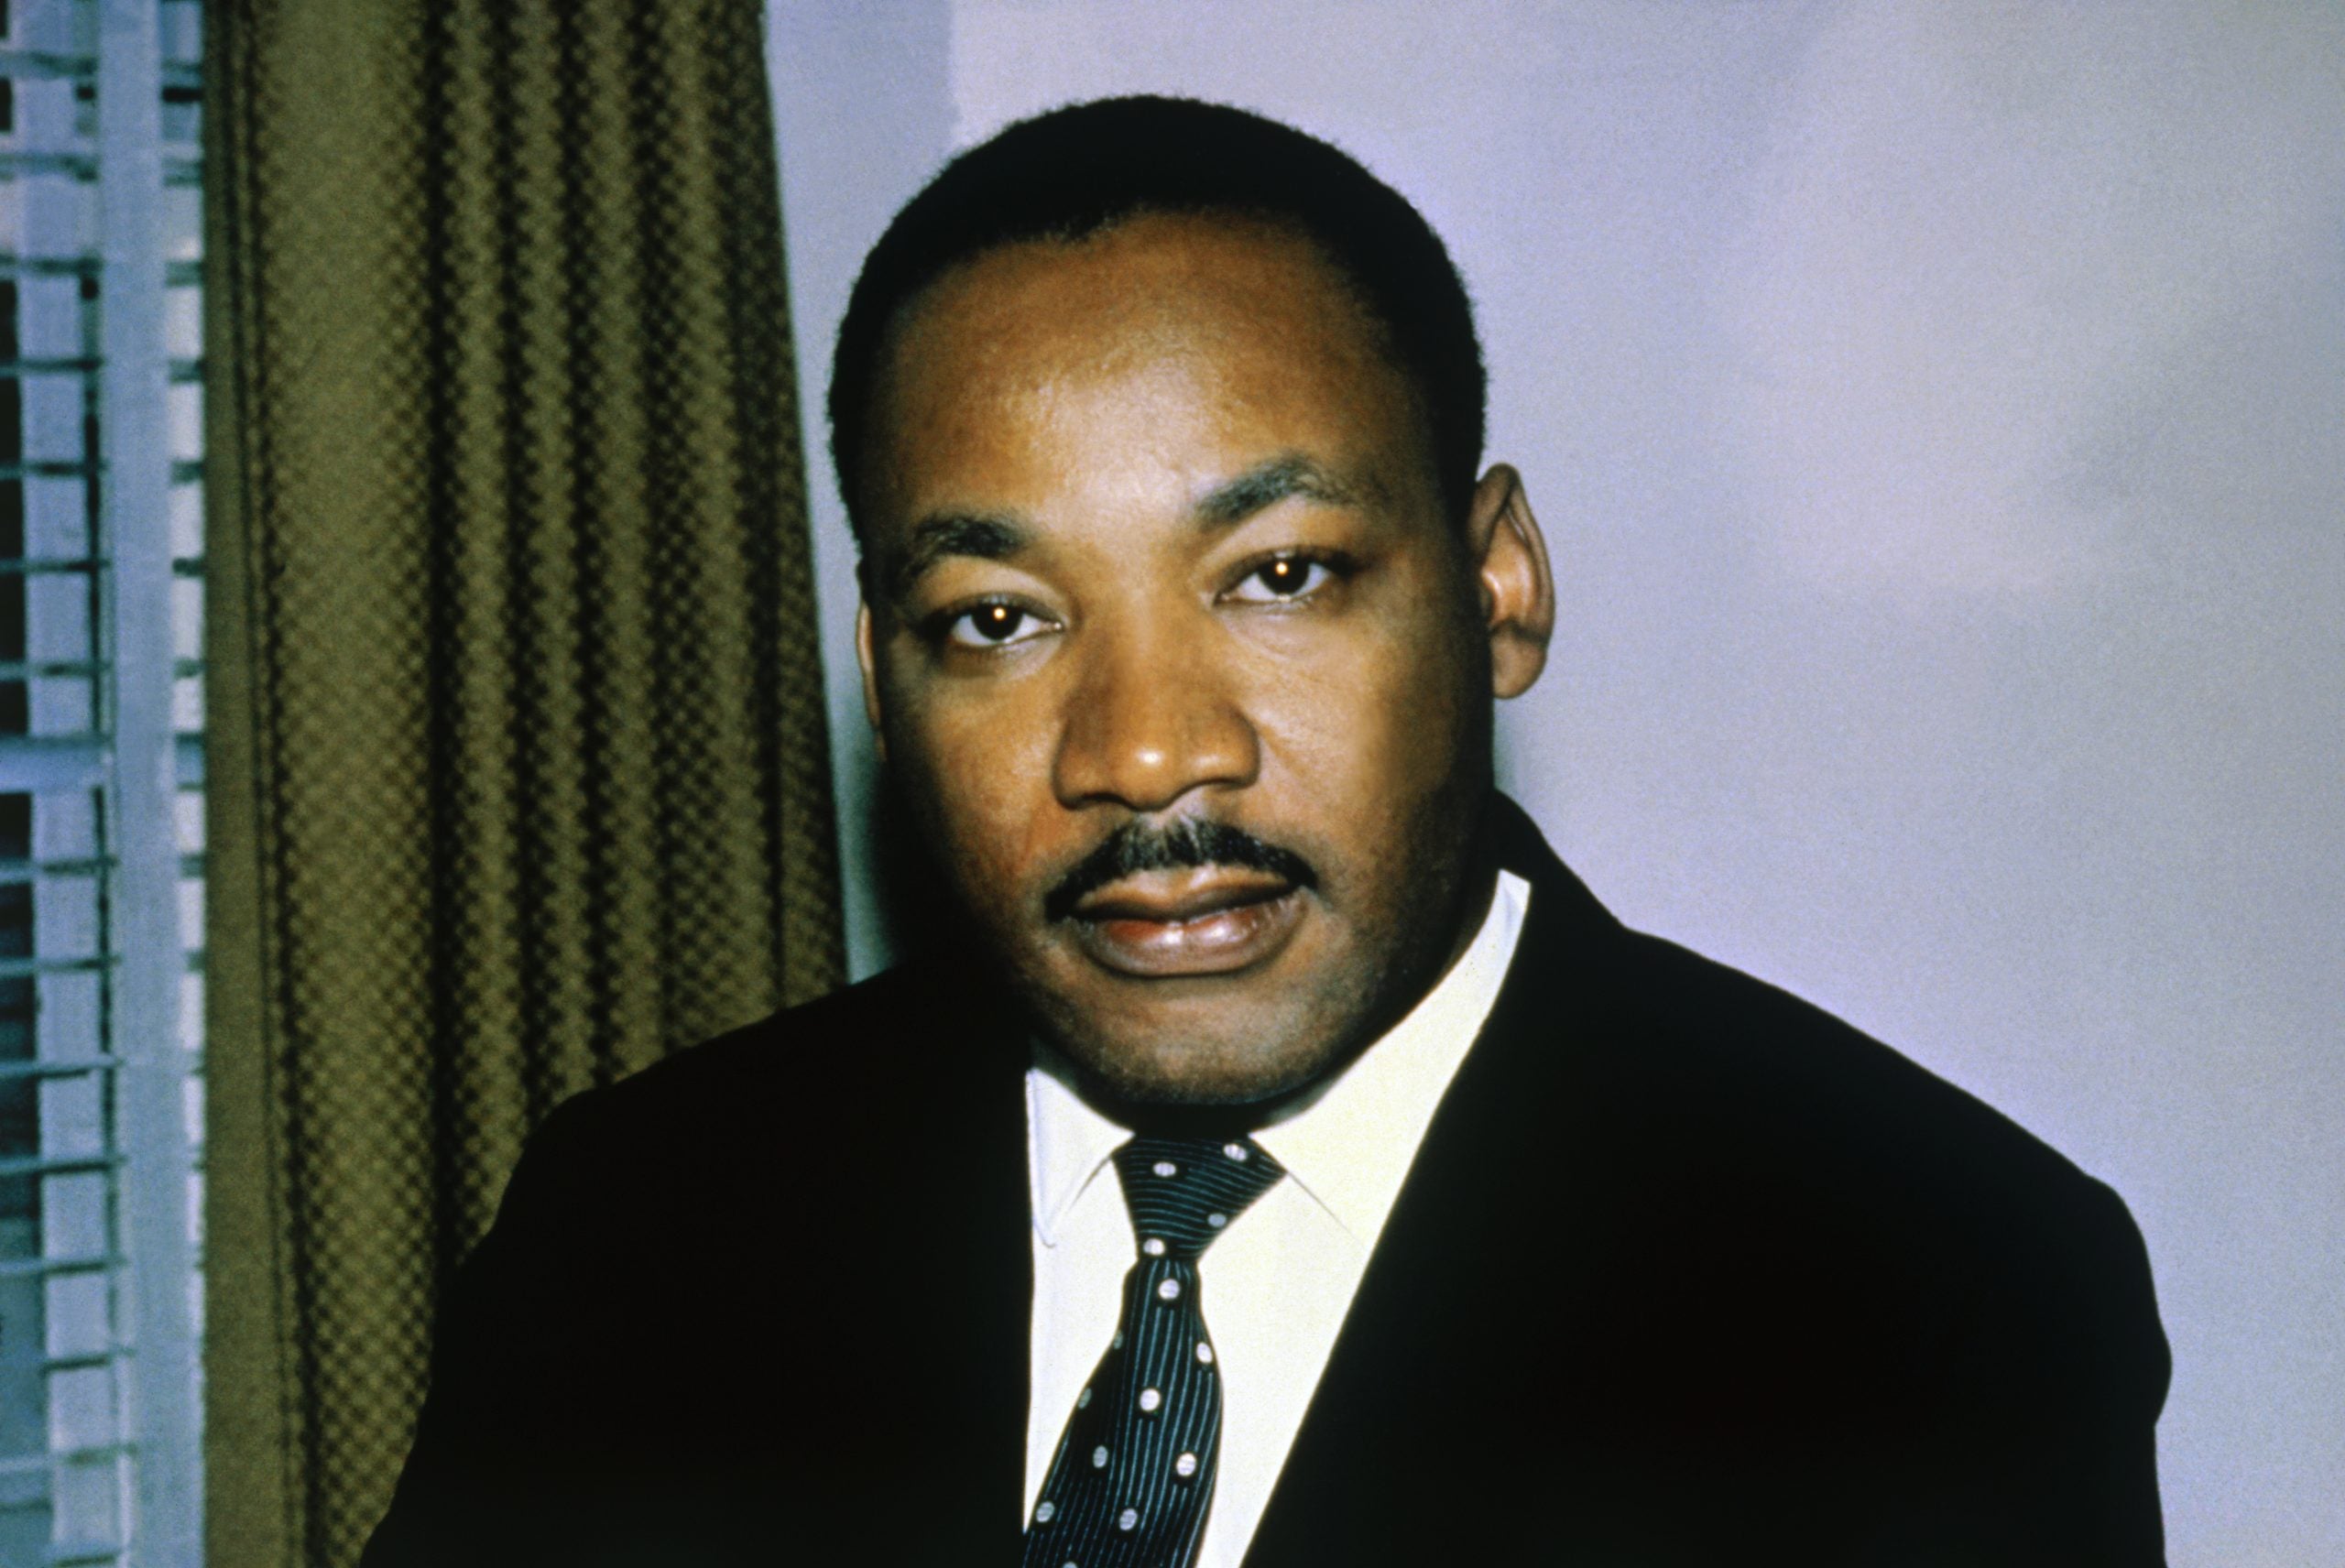 The African American Dream: A Look Back At MLK's Focus On Driving Black Economic Equality